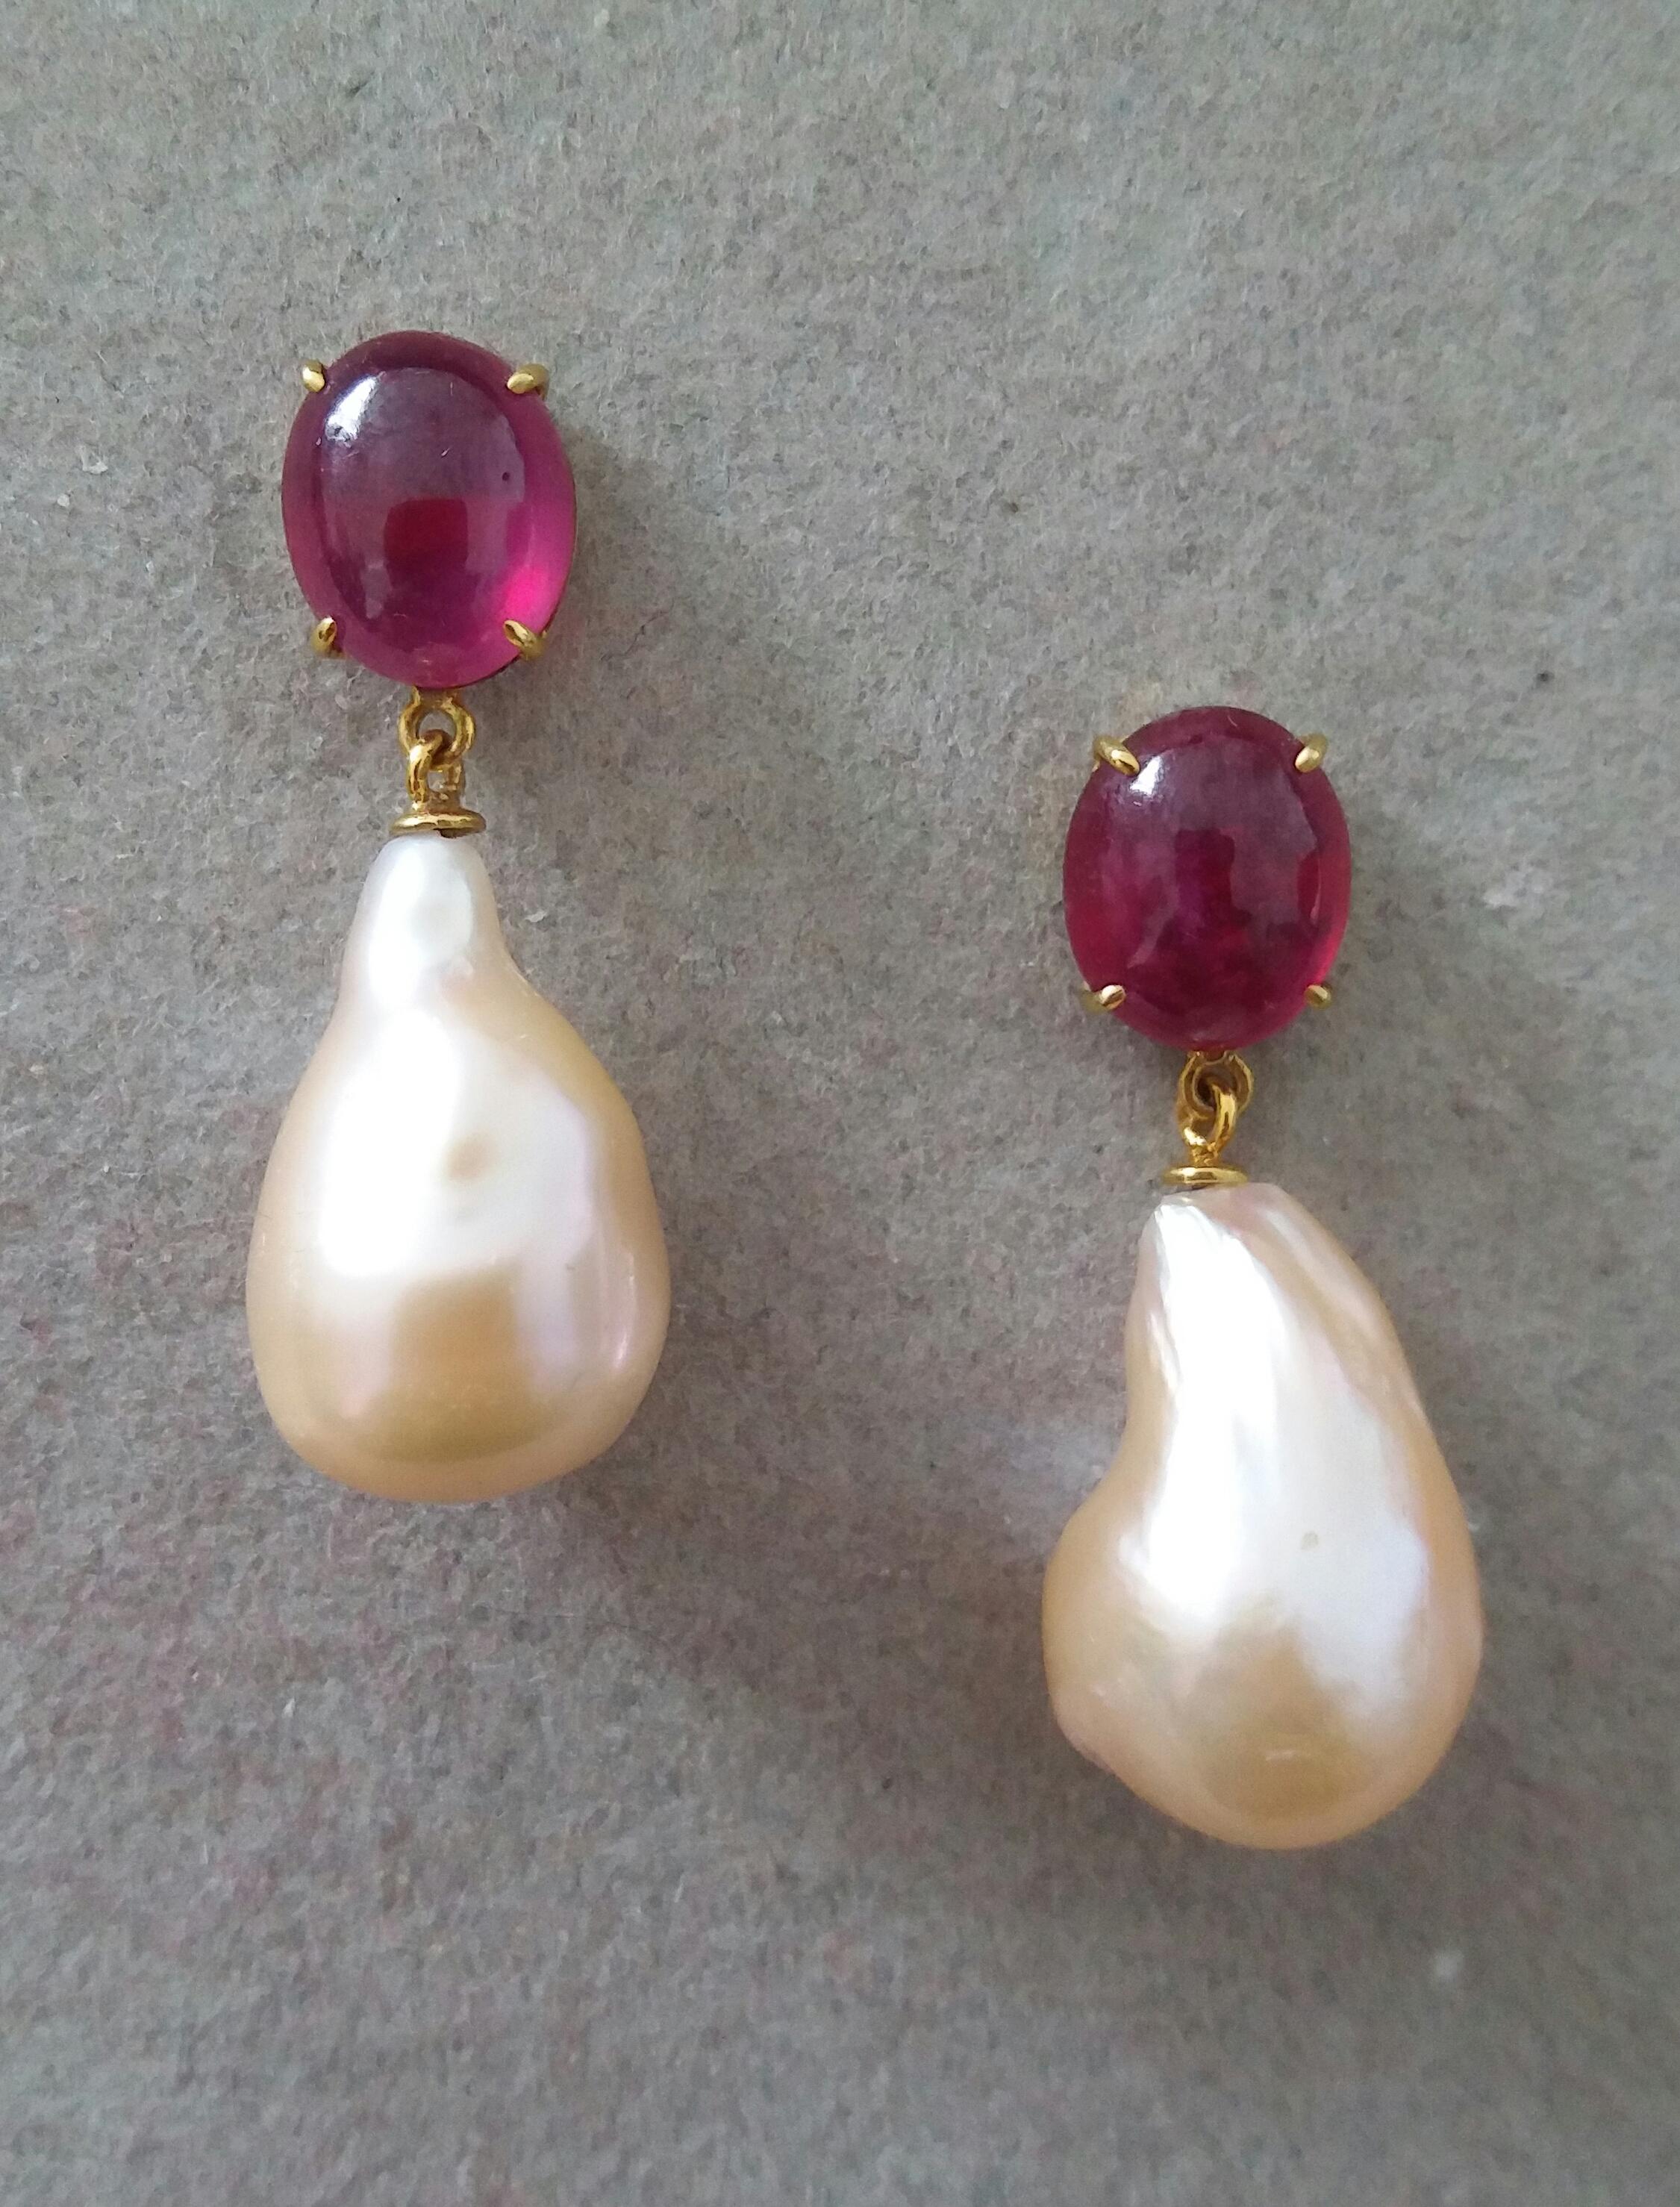 Big Size Pear Shape Cream Color Pearls Oval Ruby Cabochon 14 Karat Gold Earrings 2